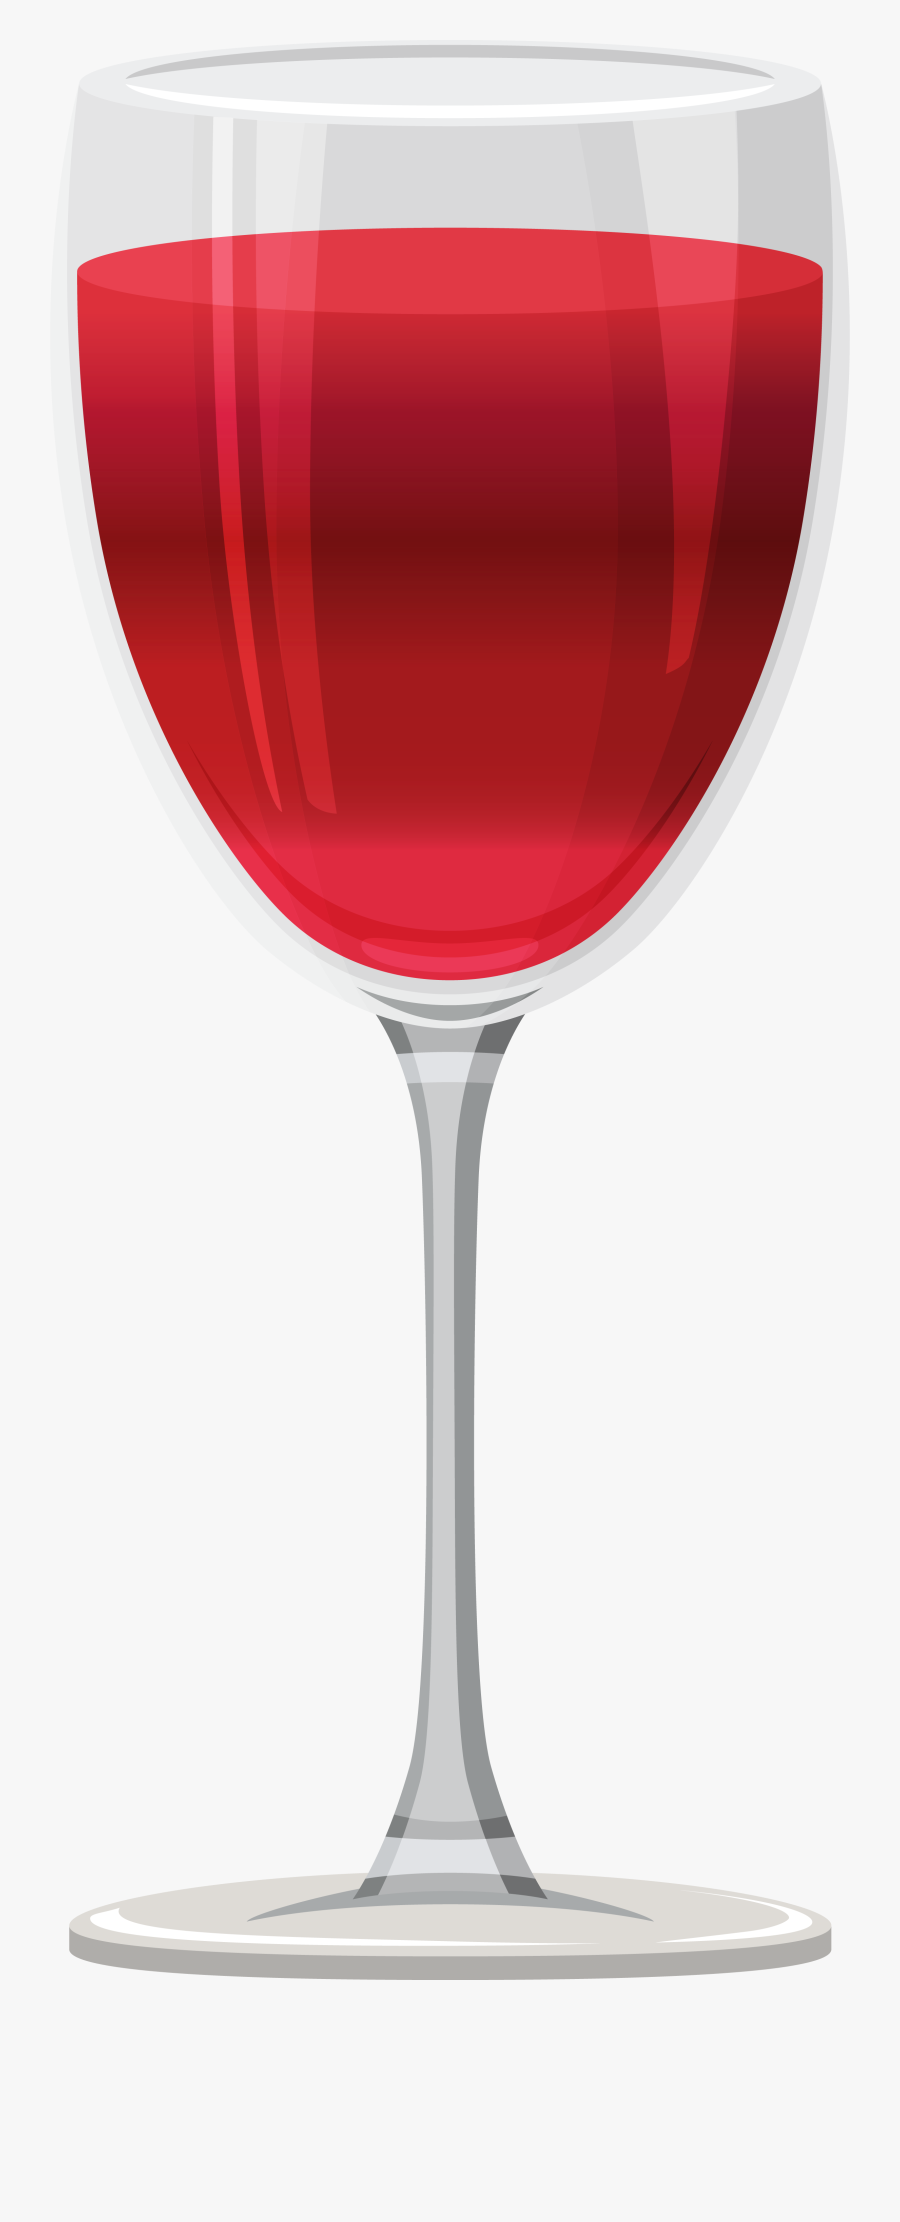 Glass Clipart Transparent Background - Red Wine Glass Clipart Transparent, Transparent Clipart